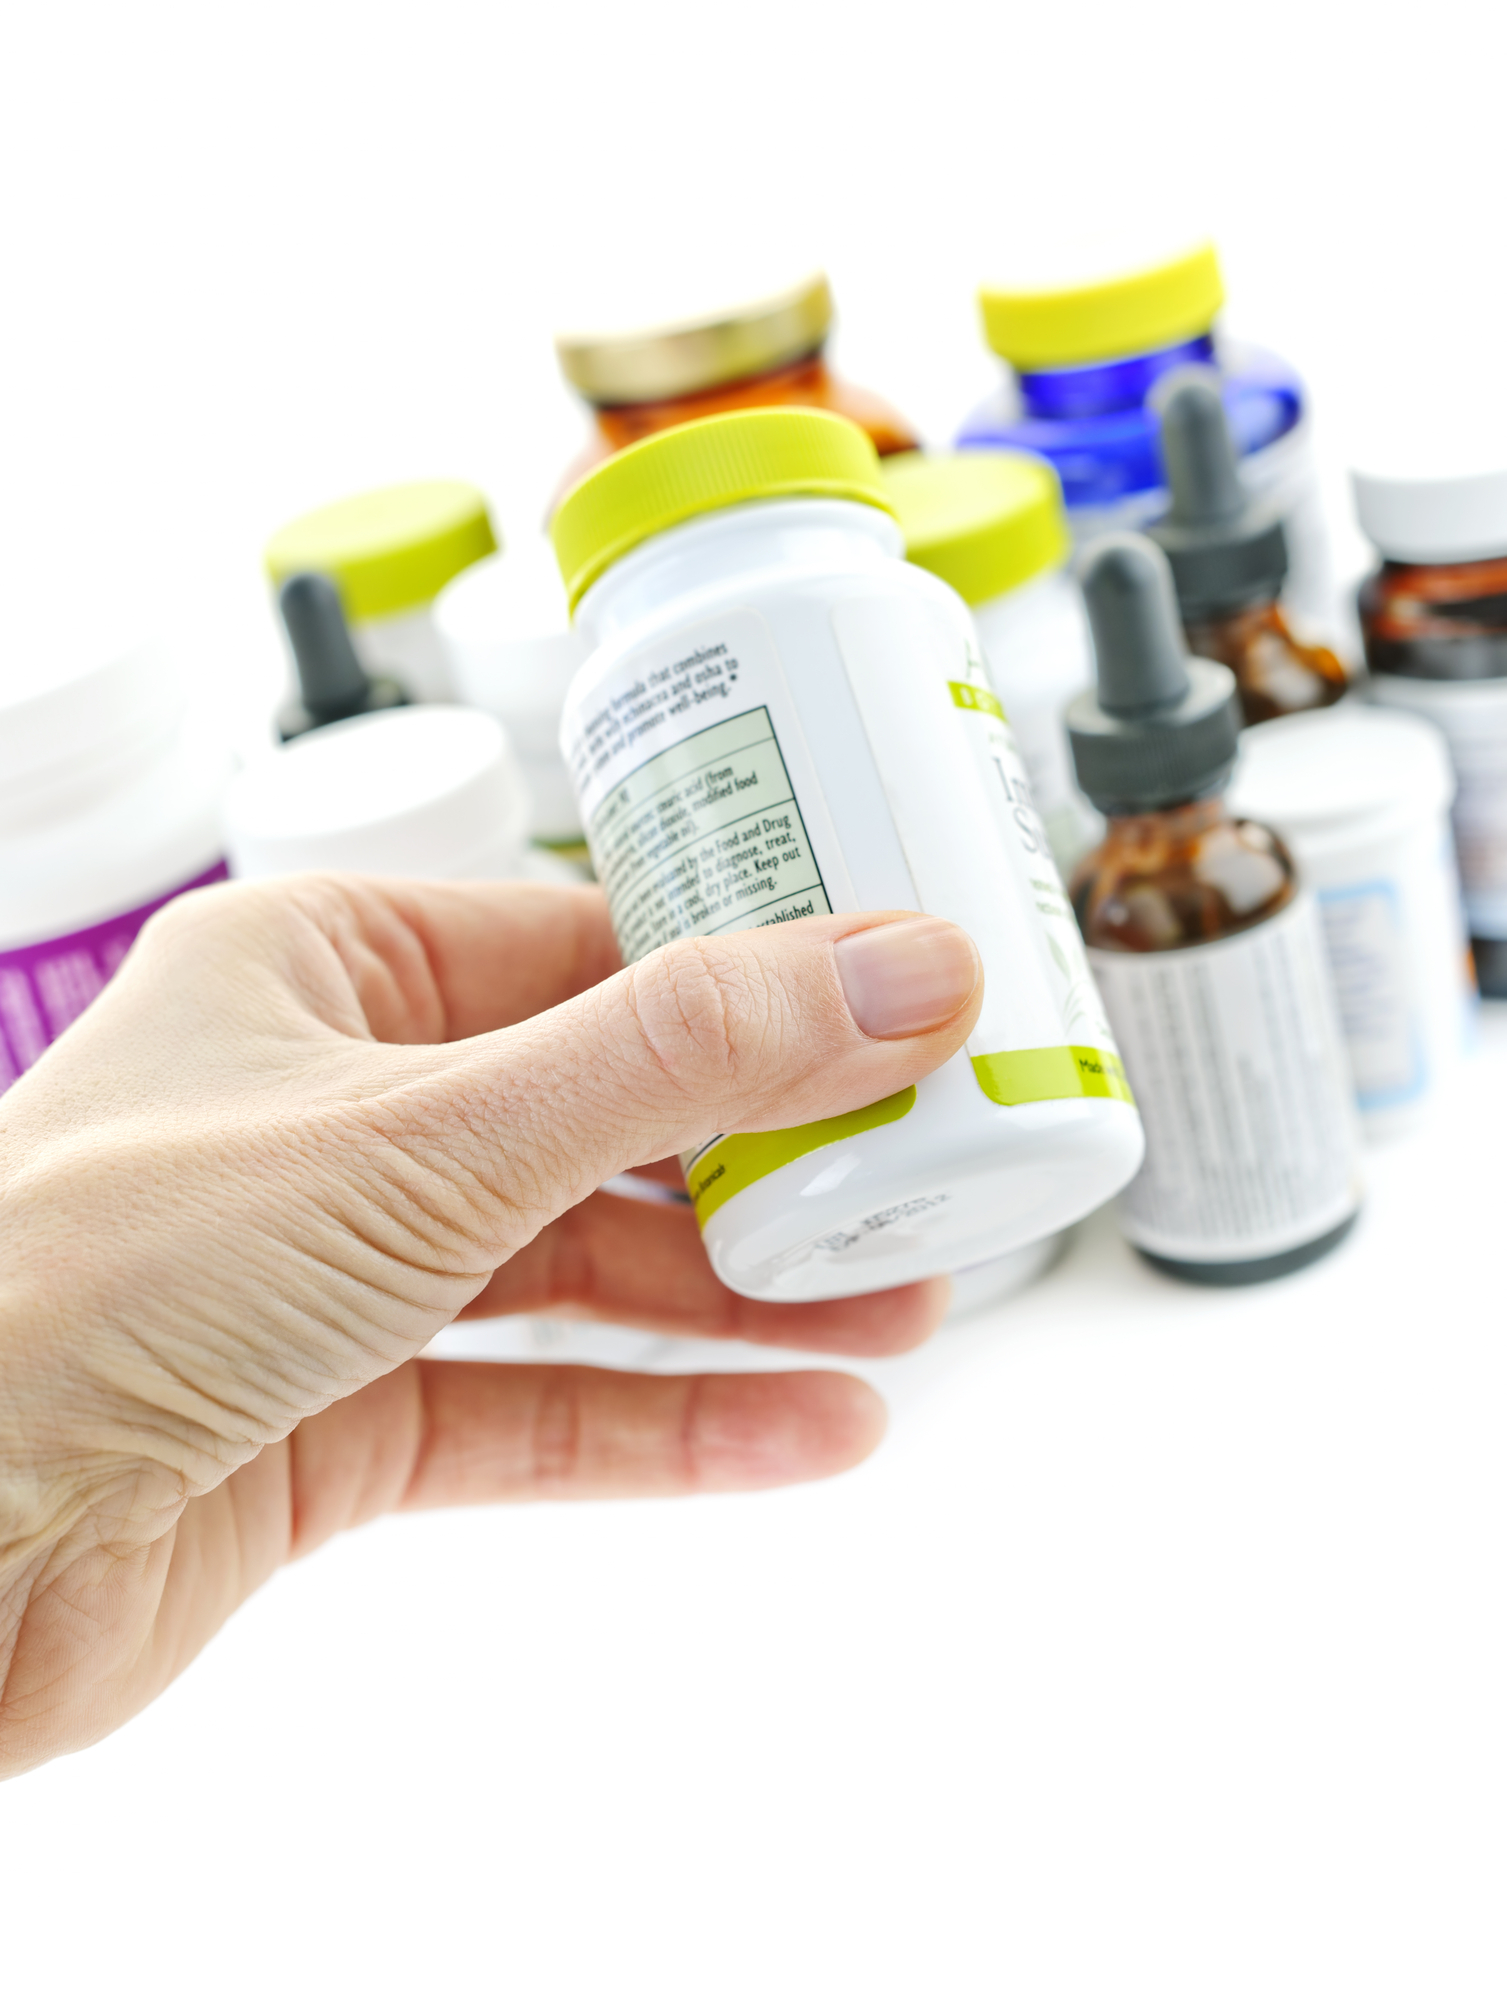 Some Tips For Designing Perfect Pharmaceutical Labels